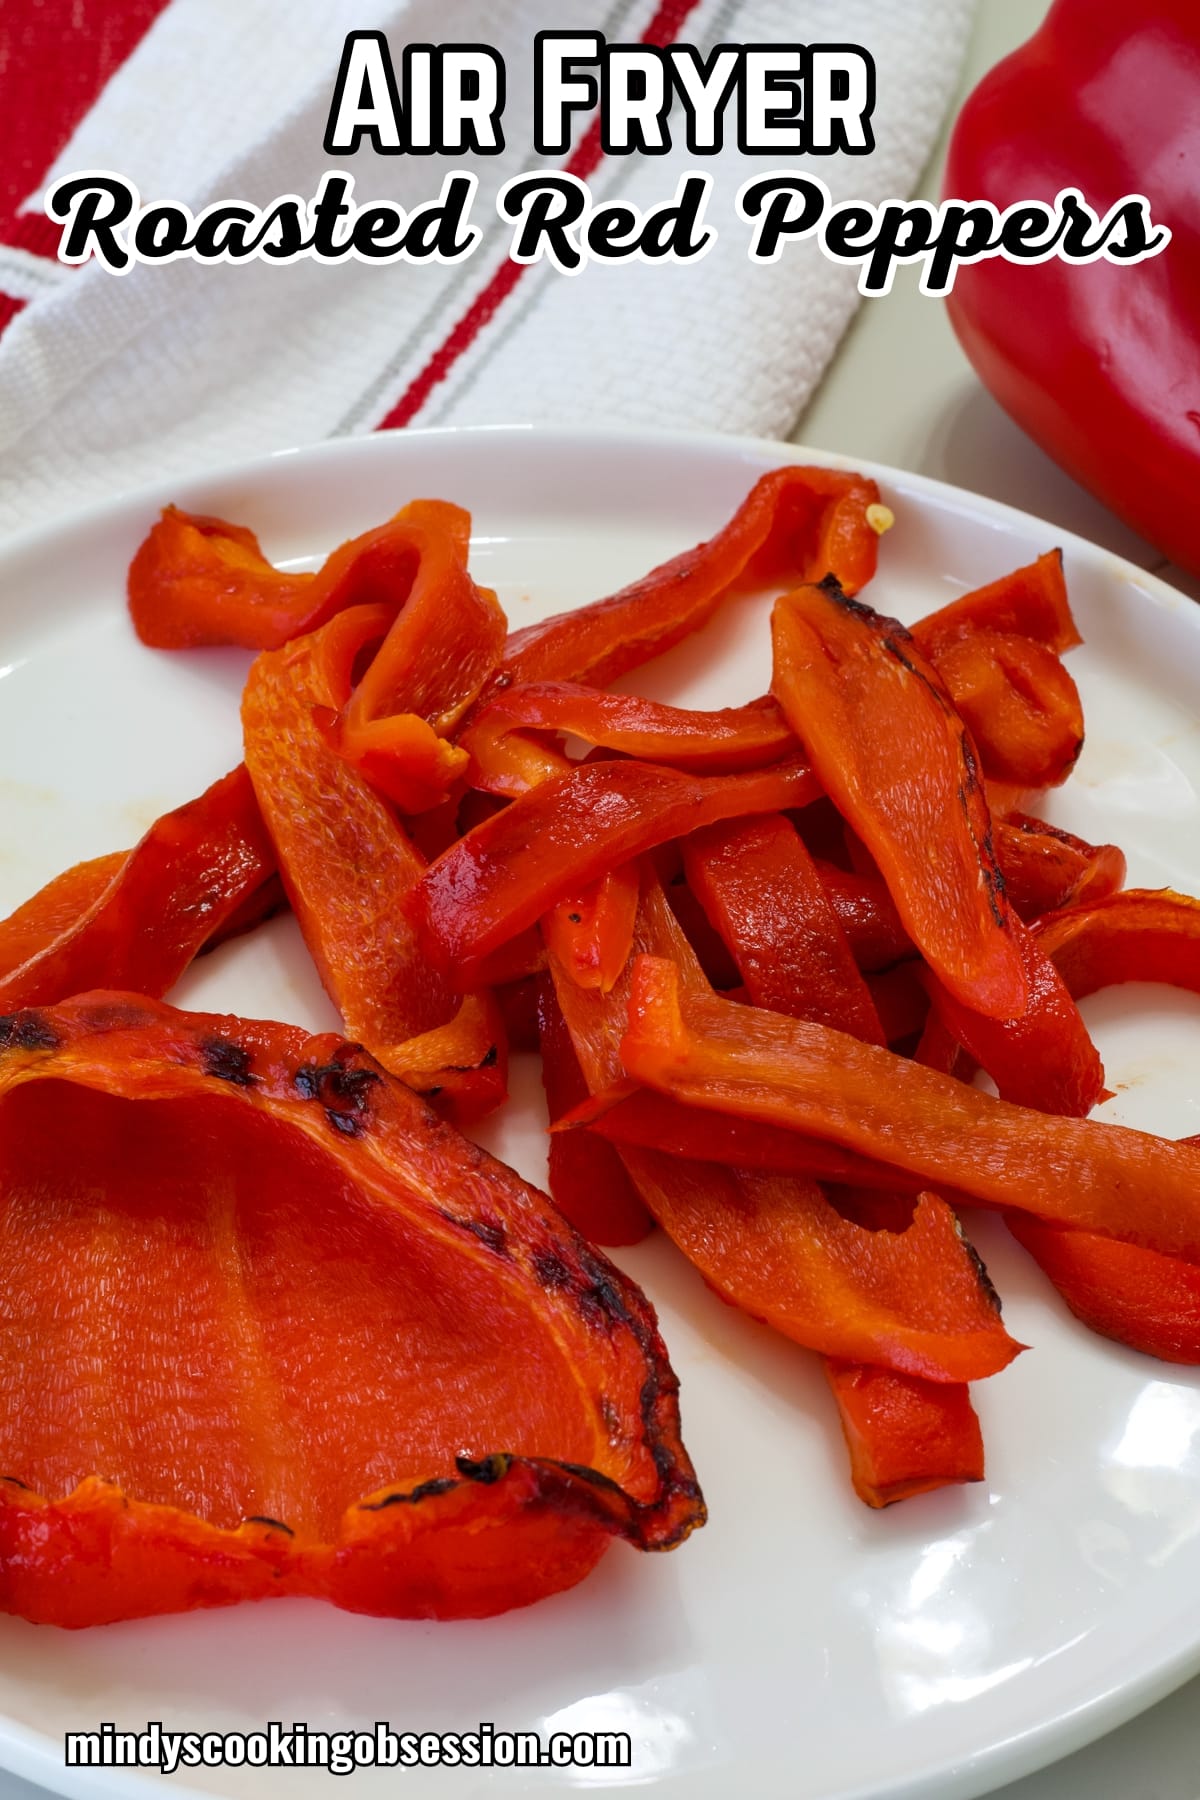 Get ready to enjoy the amazing flavors of roasted peppers with this easy air fryer recipe. Whether you choose bell peppers or chile peppers, it's a win-win! via @mindyscookingobsession